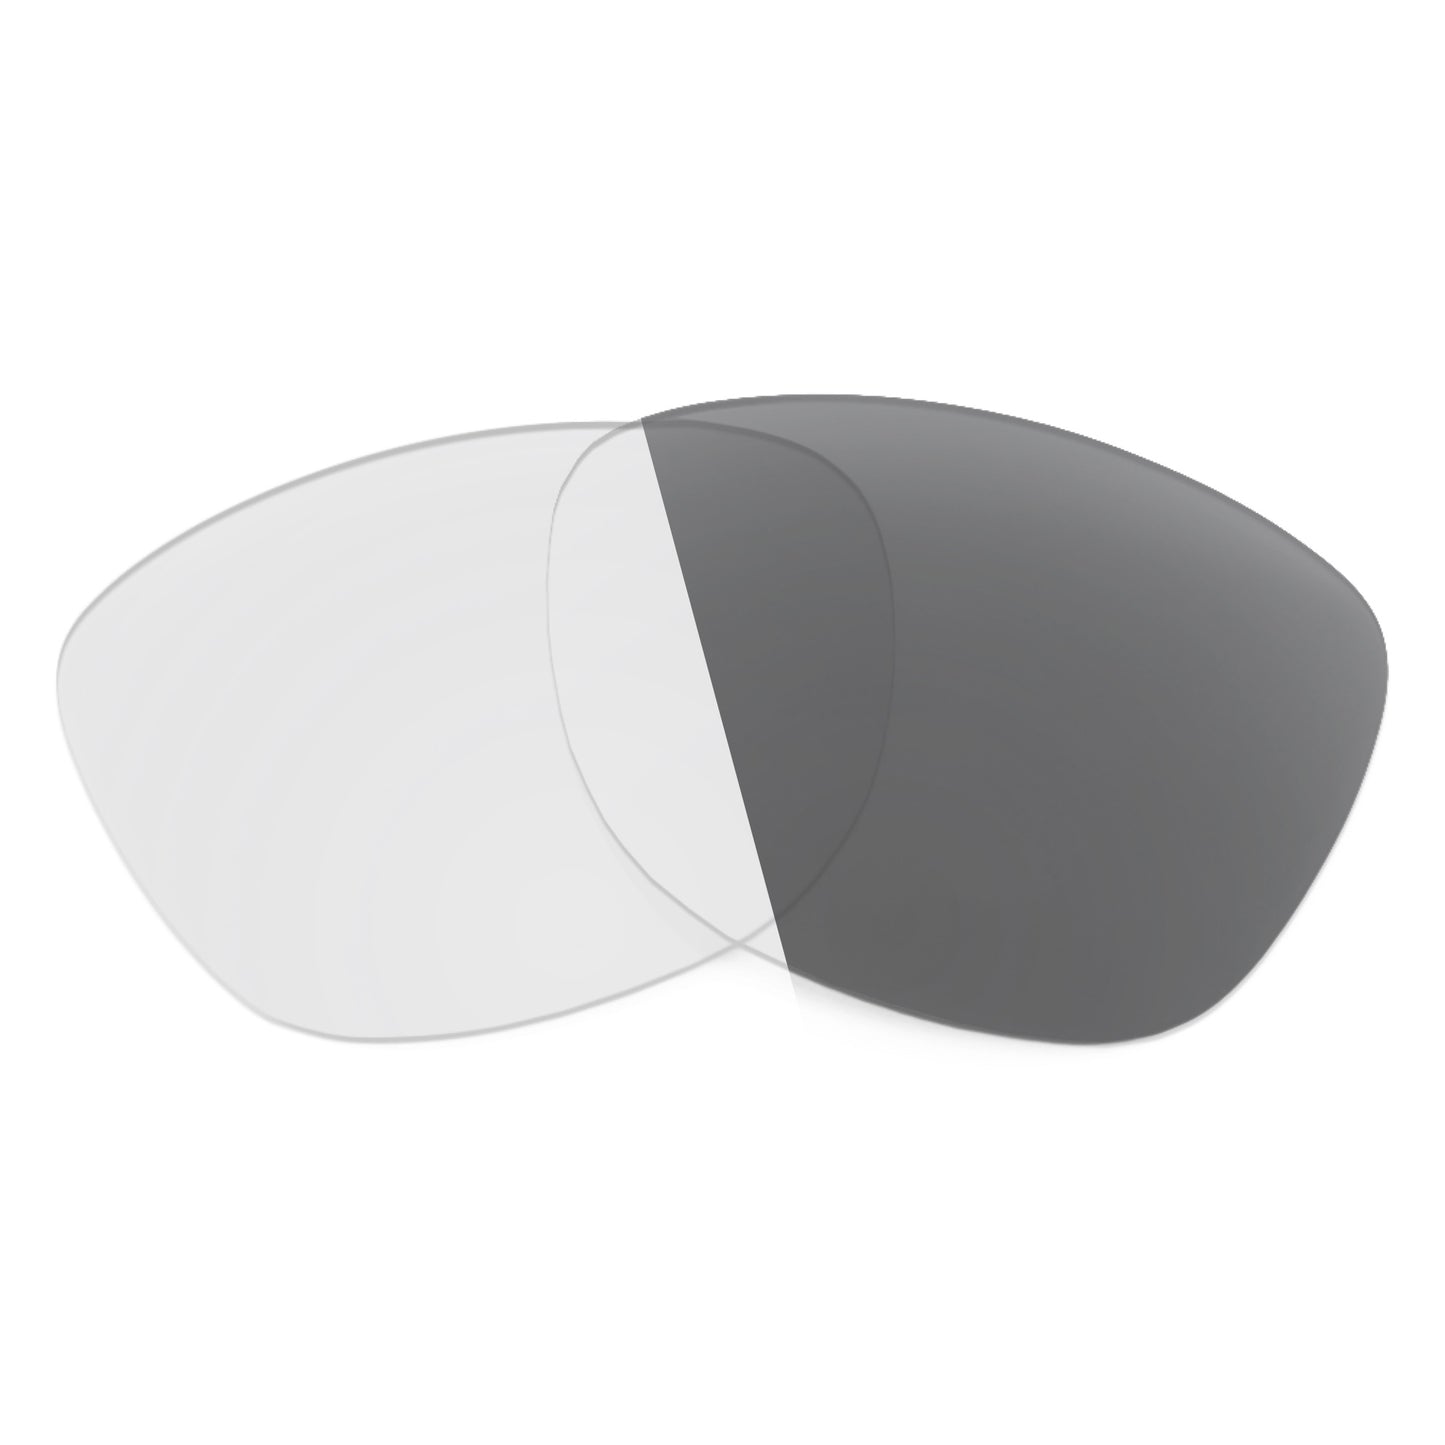 Revant replacement lenses for Ray-Ban Roundabout RB2192 47mm Non-Polarized Adapt Gray Photochromic